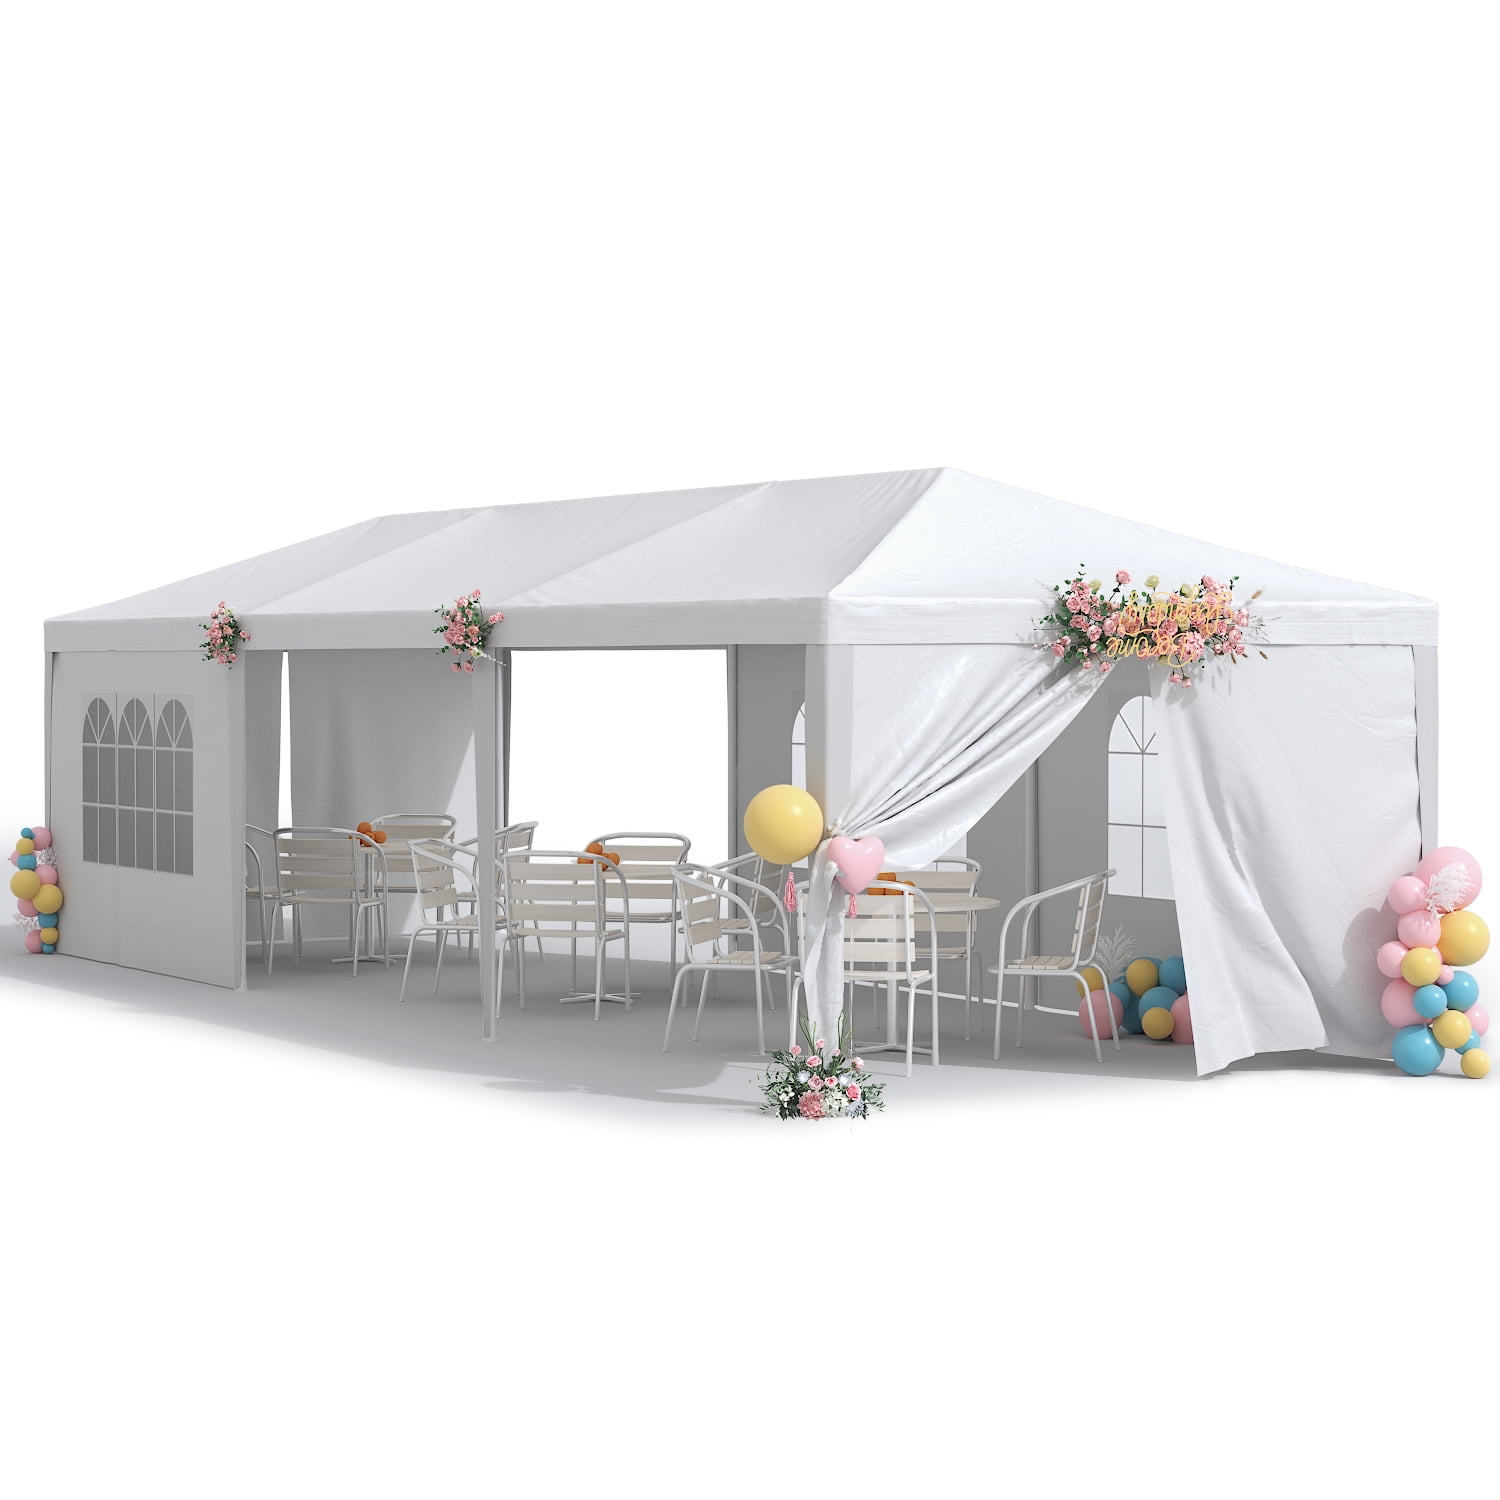 30 x 30 Frame Tent - Ultra Party by A&S Party Rental